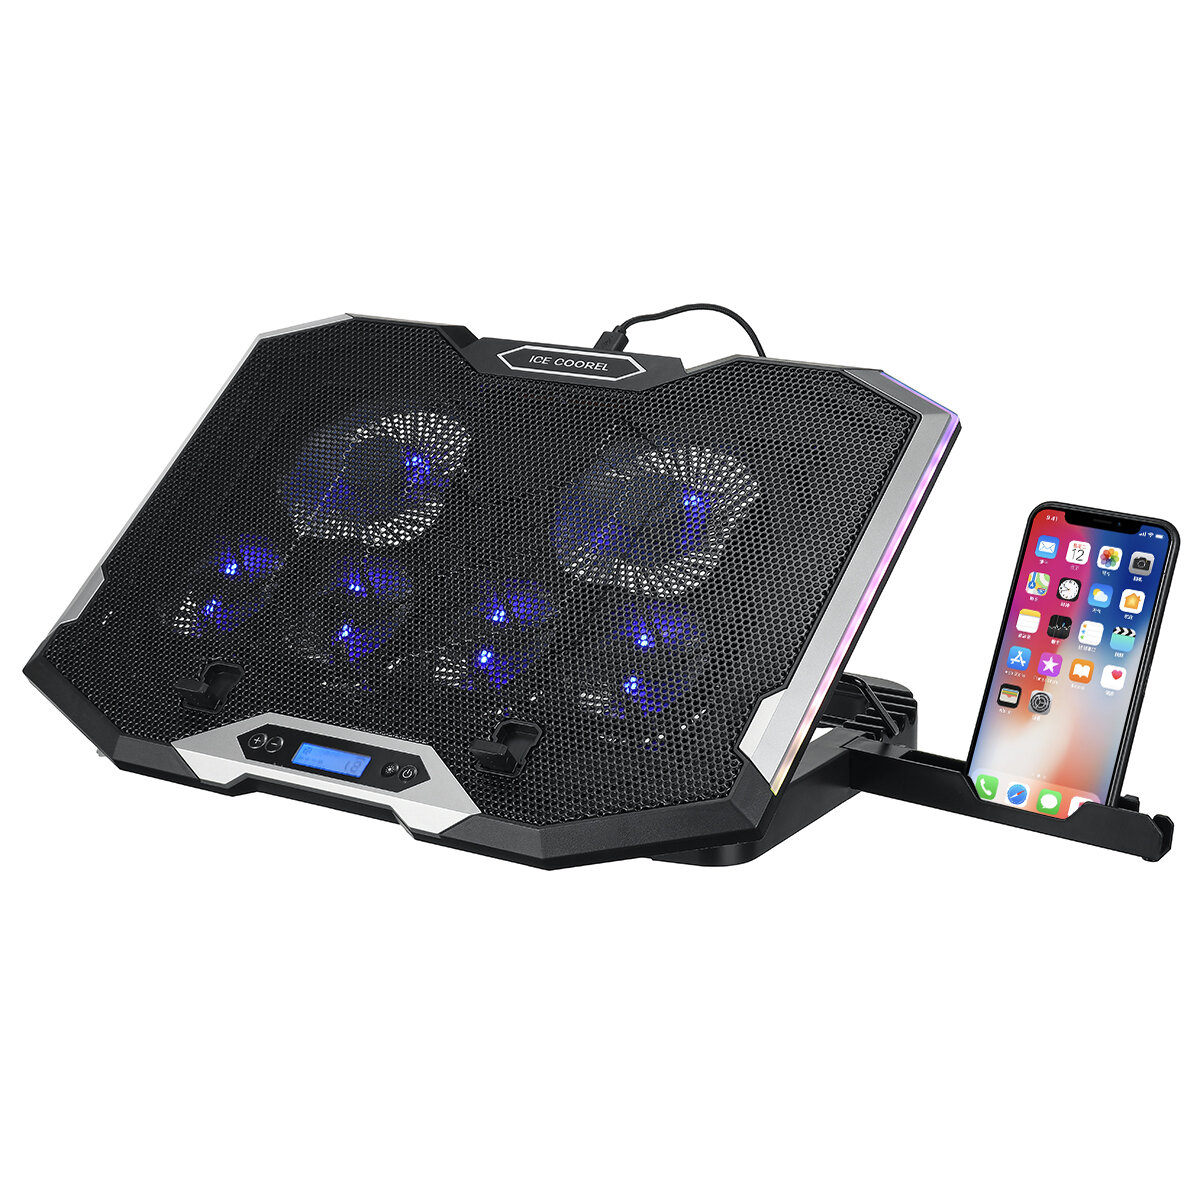 6 Fans Laptop Cooler Stand Riser RGB Cooling Pad Gaming RGB LED Screen with Mobile Phone Holder for Under 21" Laptop - Blue